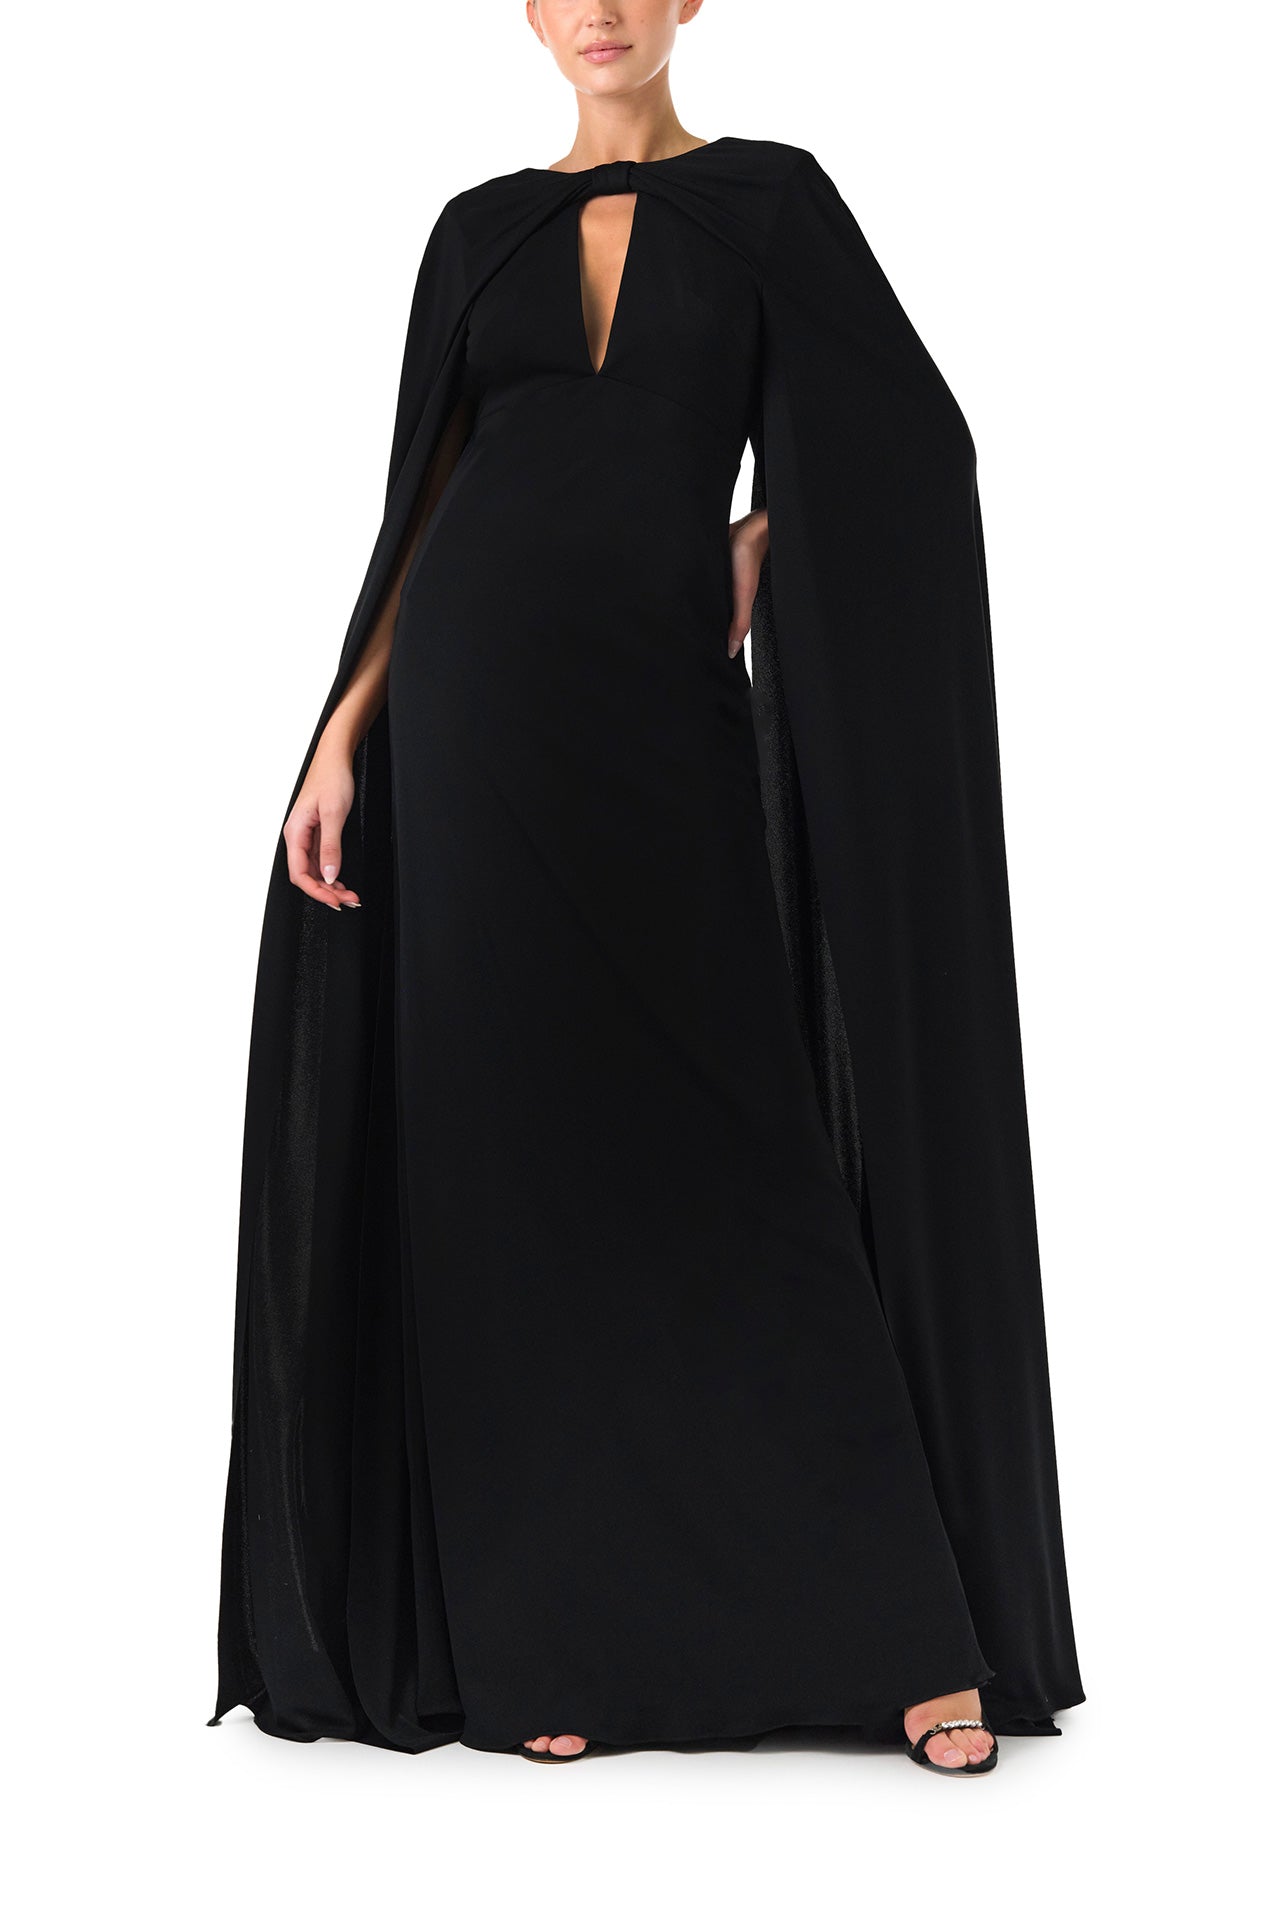 Monique Lhuillier Spring 2024 black crepe-back satin gown with attached cape and keyhole bodice - front.